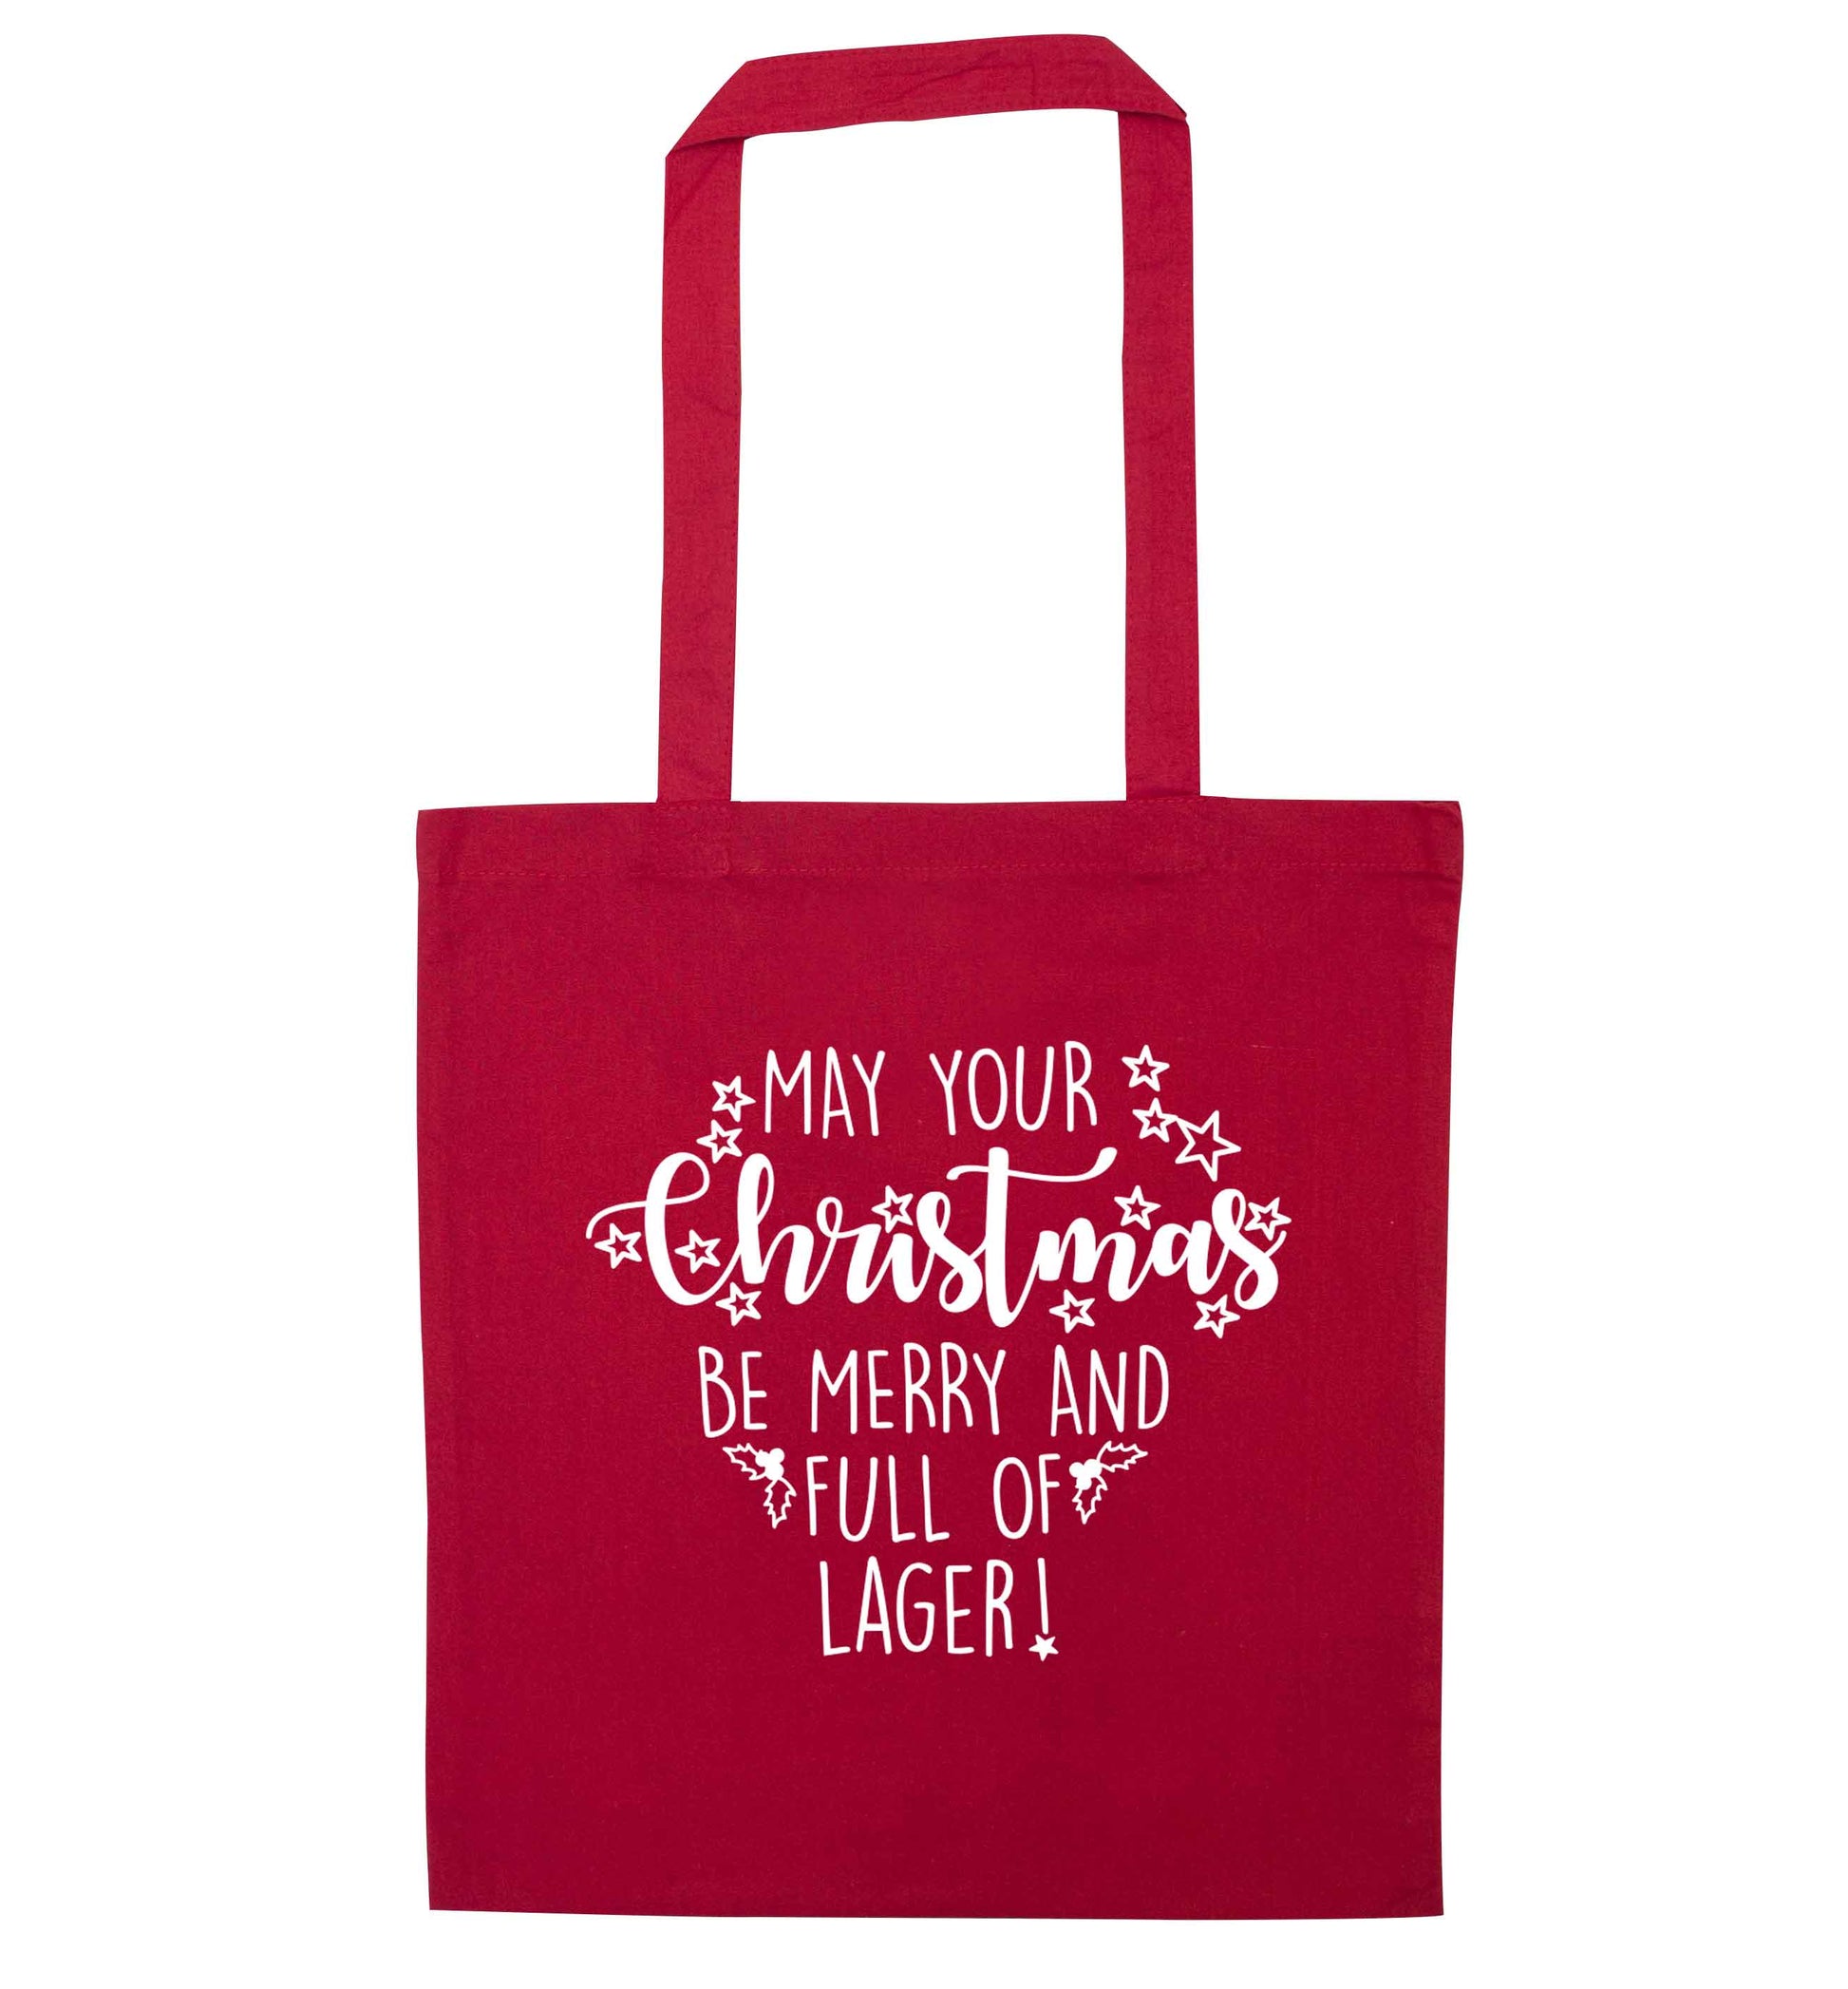 May your Christmas be merry and full of lager red tote bag